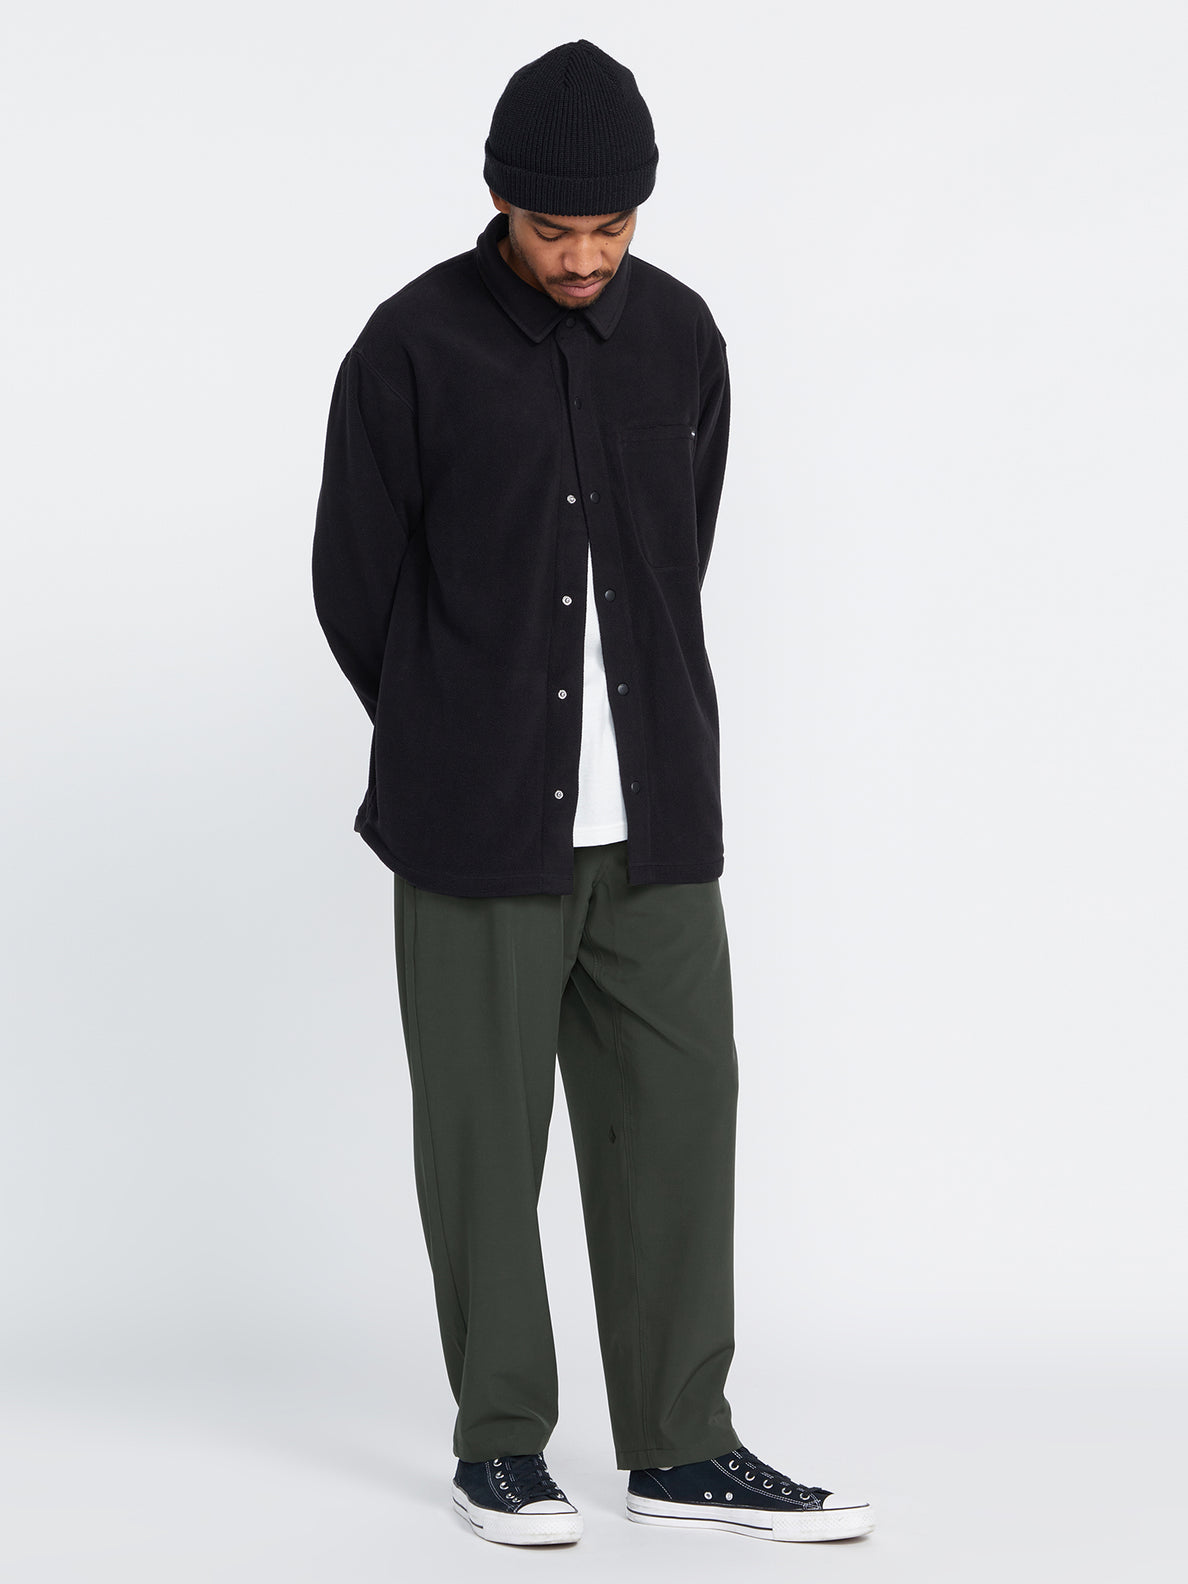 Veeco Transit Pants - Stealth (A1132308_STH) [43]